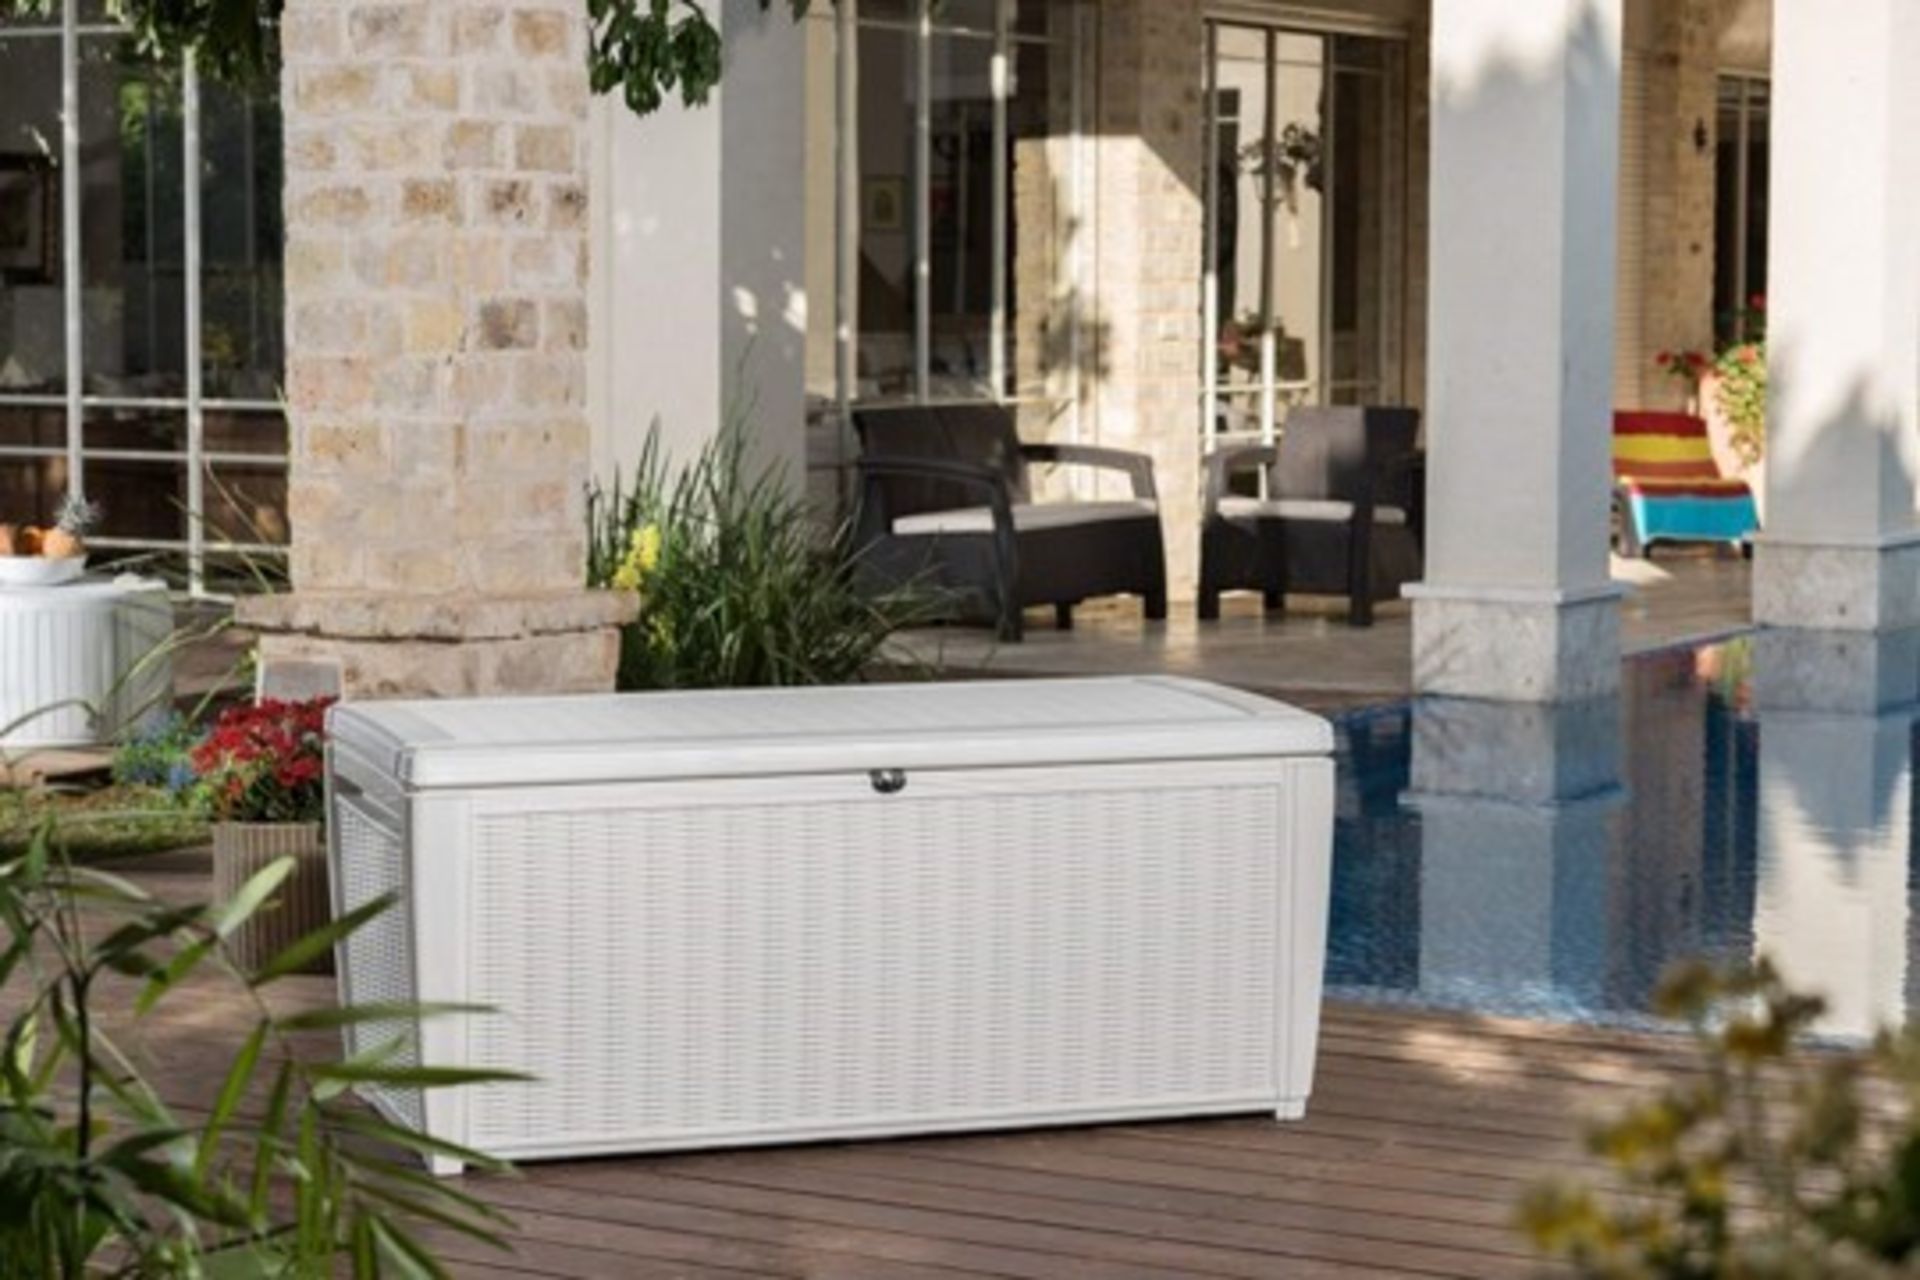 Keter Sumatra Rattan Style Storage Box Transform your pool area into a stylish, practical and - Image 2 of 4